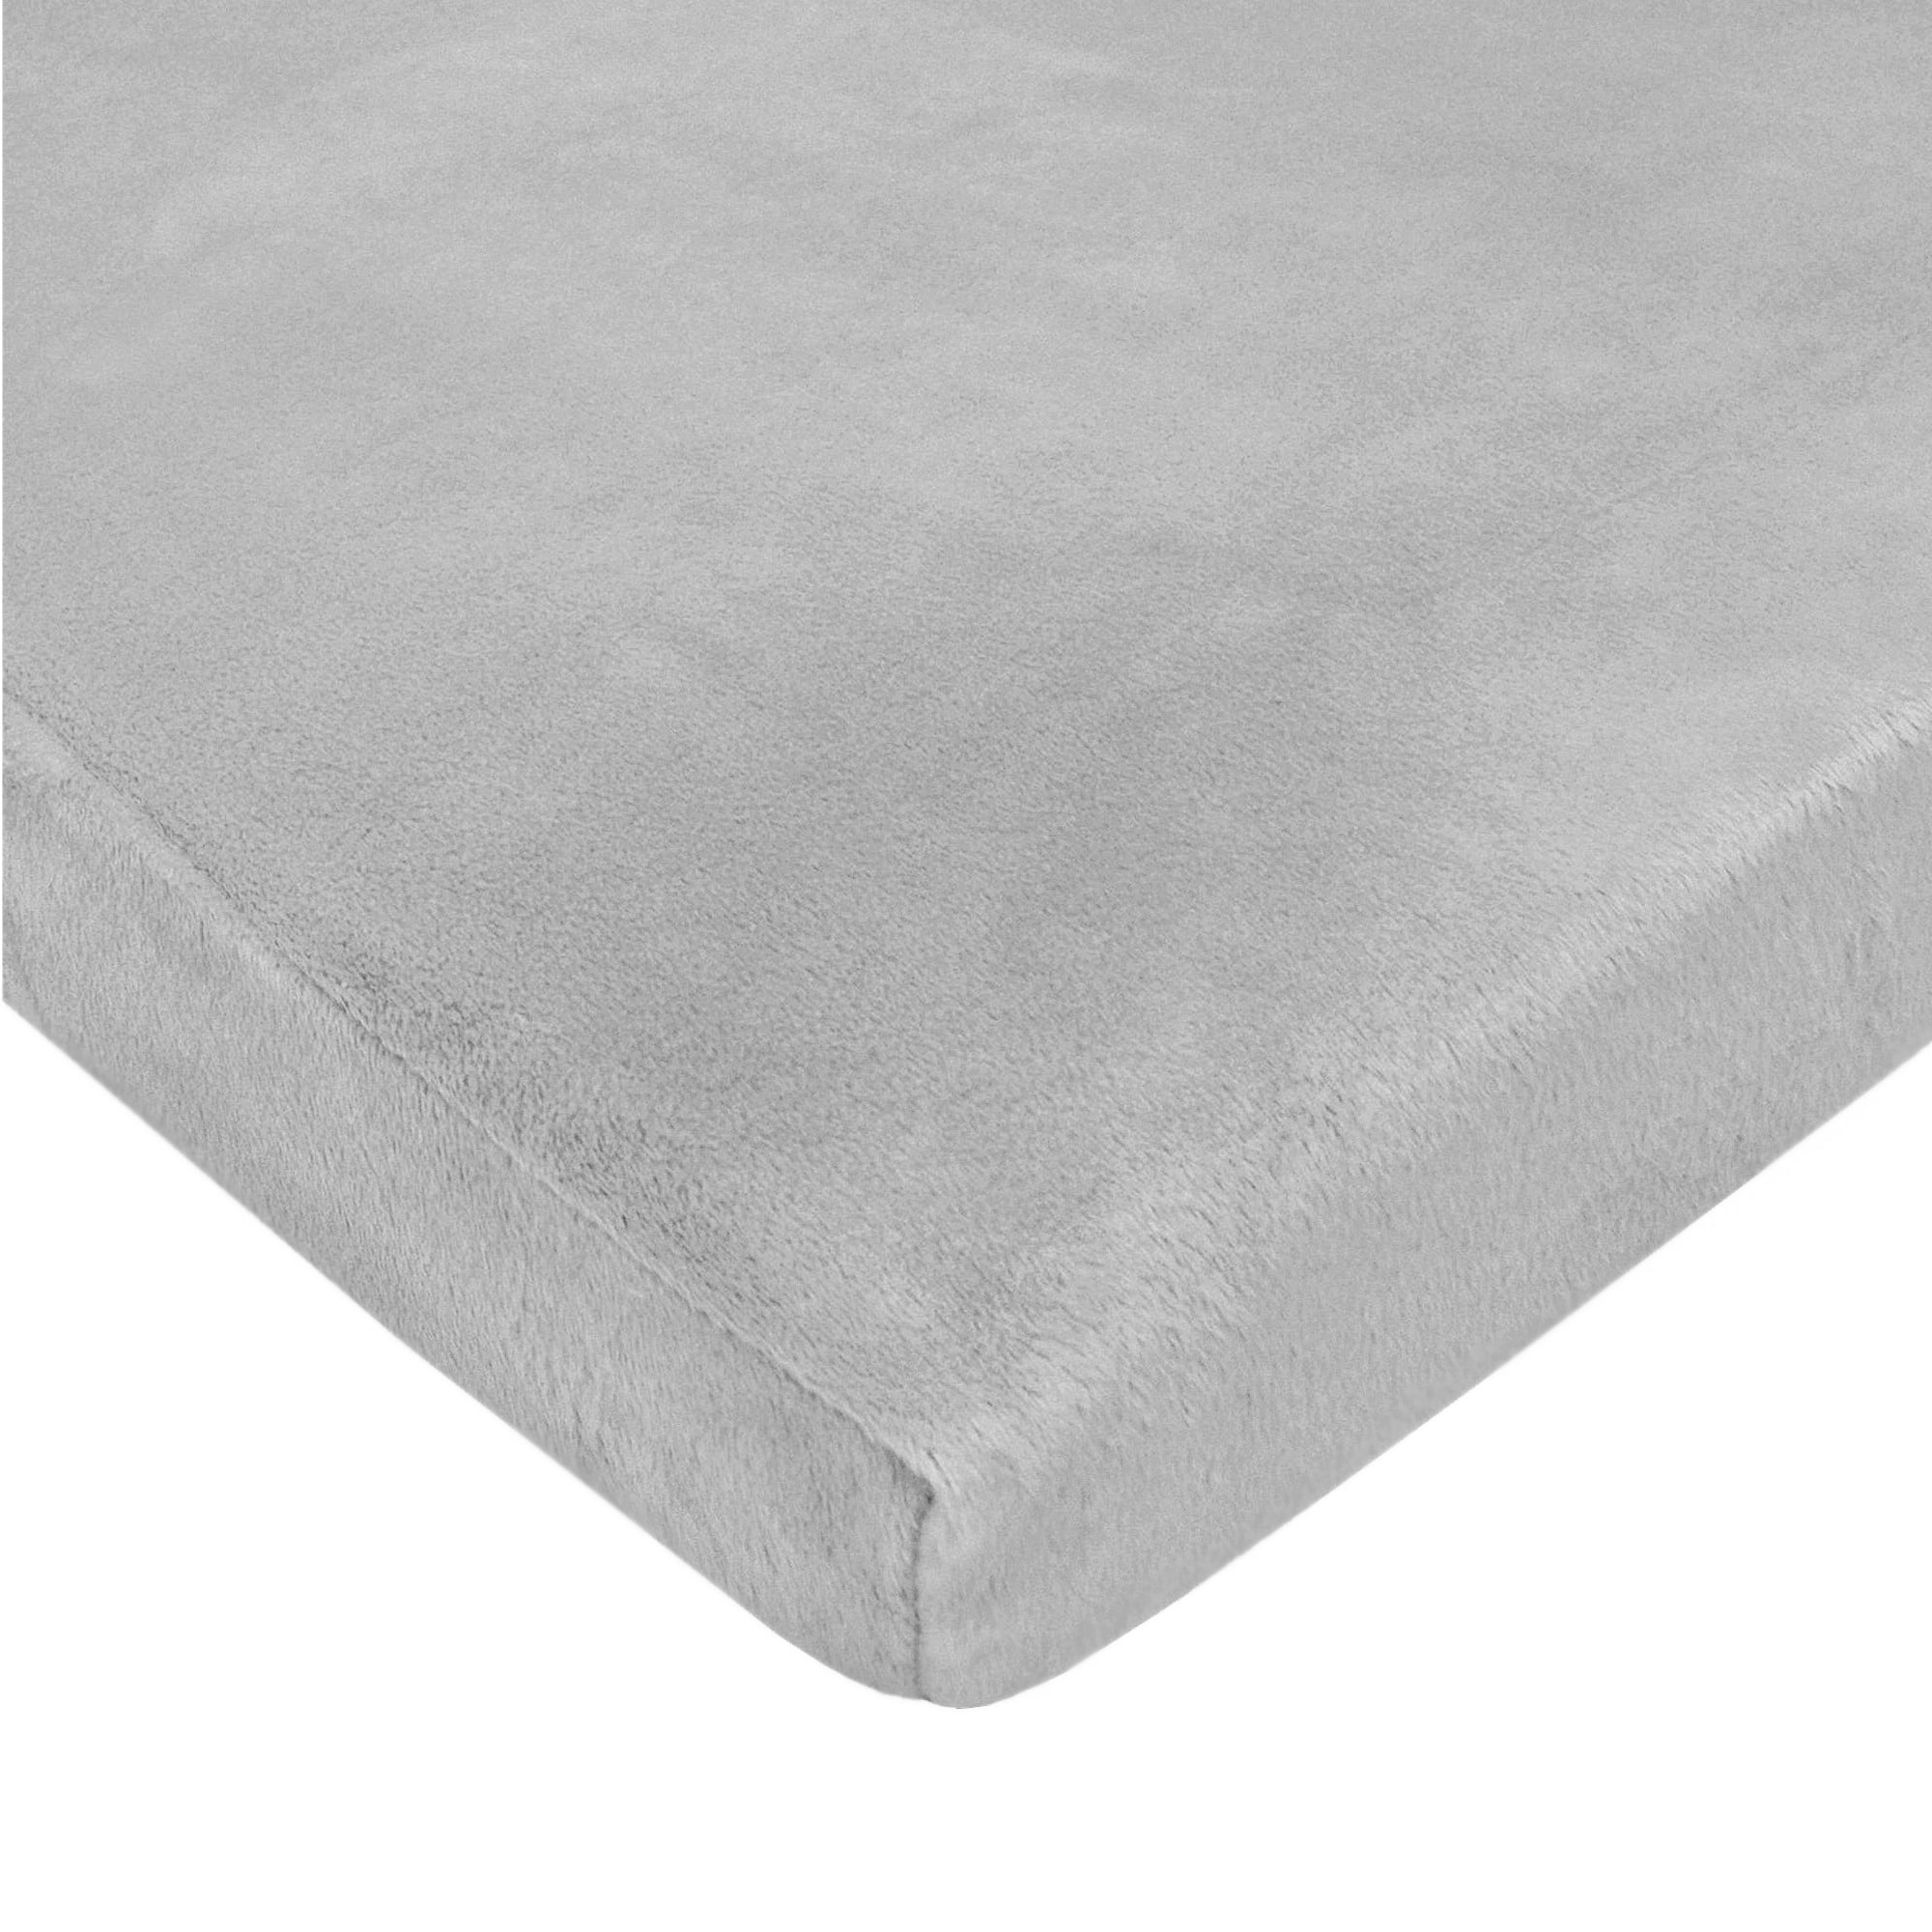 2 x Baby Cot Bed Fitted sheet 70x140 100% cotton jersey White 